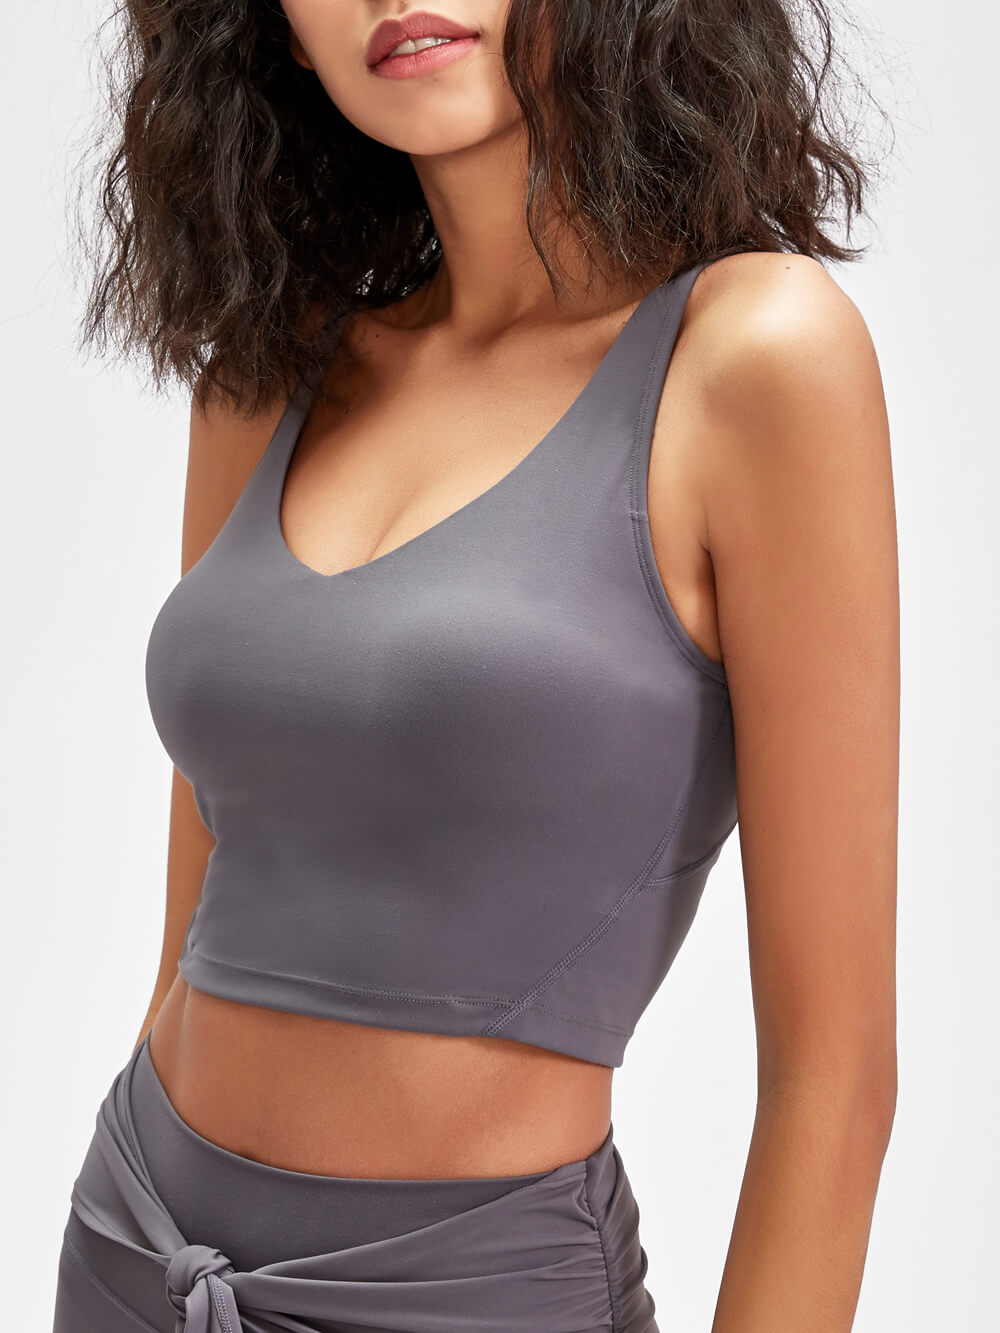 Nepoagym PASSION New Color Women Long Crop Tank Top with Built in Bra V  Neck strapless bra push up Brushed Sports Bra Running – Nepoagym Official  Store